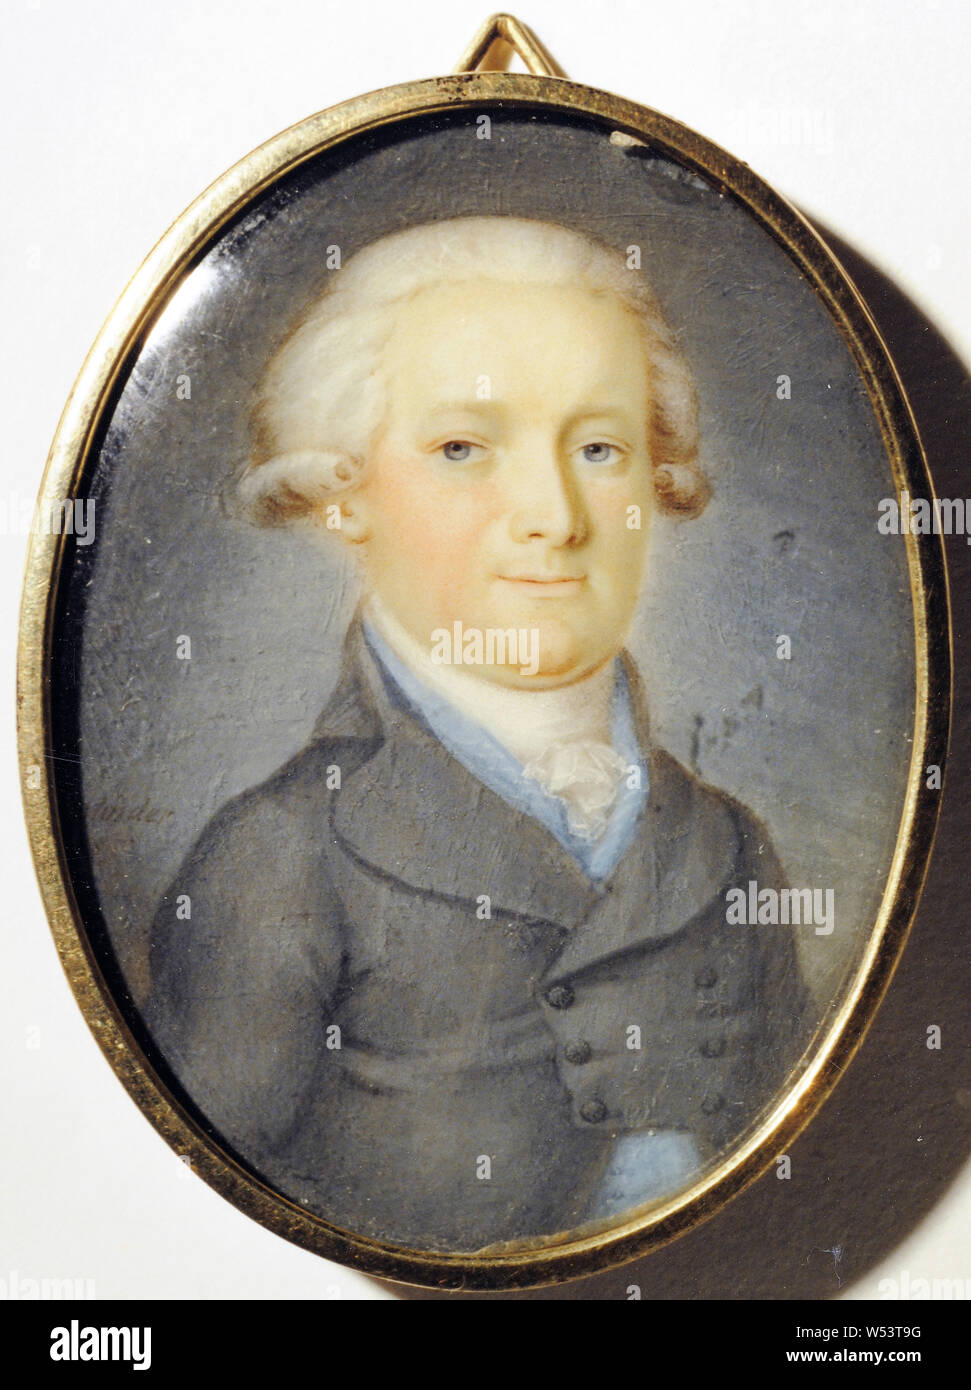 Johan Erik Bolinder, Johan Petter Tidén, librarian and professor, painting, 1795, Watercolor, gouache on ivory, Oval, Frame of gold, Height, 5.3 cm (2 inches), Signed, Bolinder 1795 Stock Photo